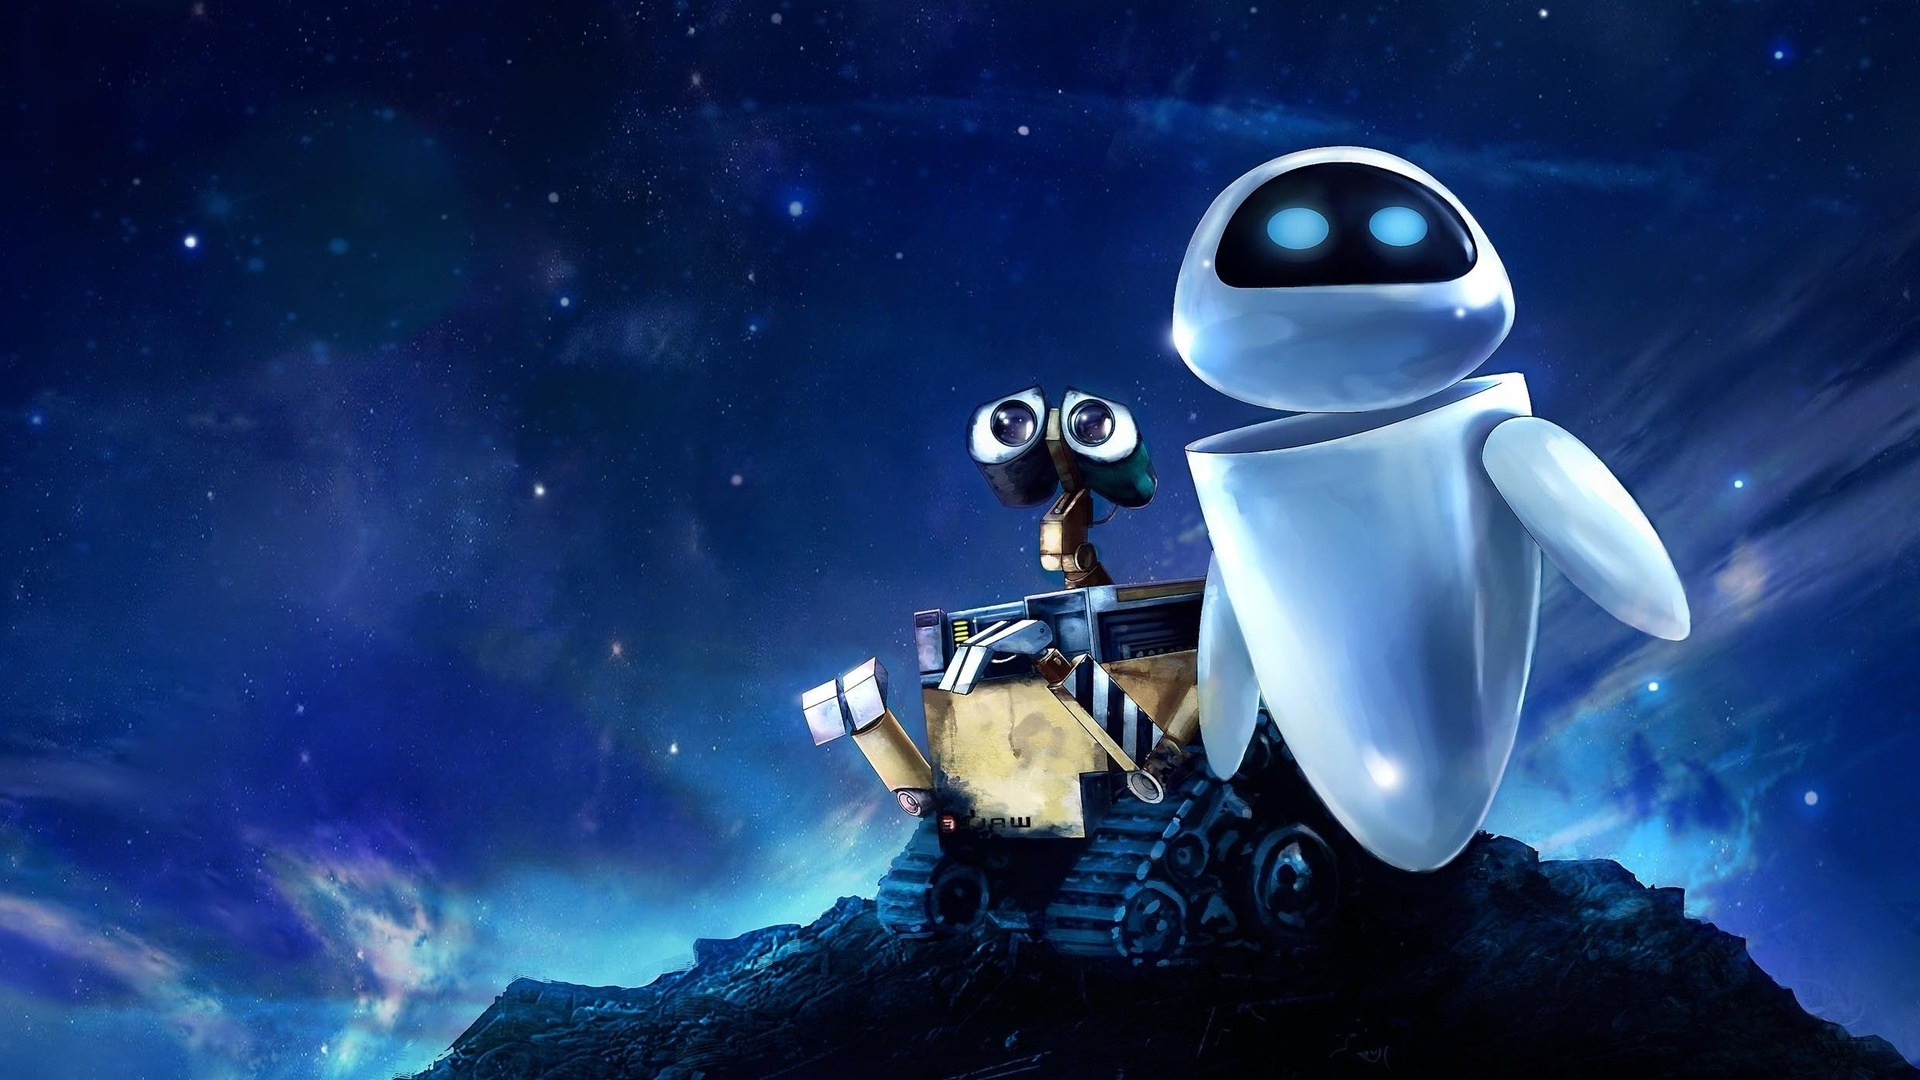 Wall E And Eve Background - HD Wallpaper 